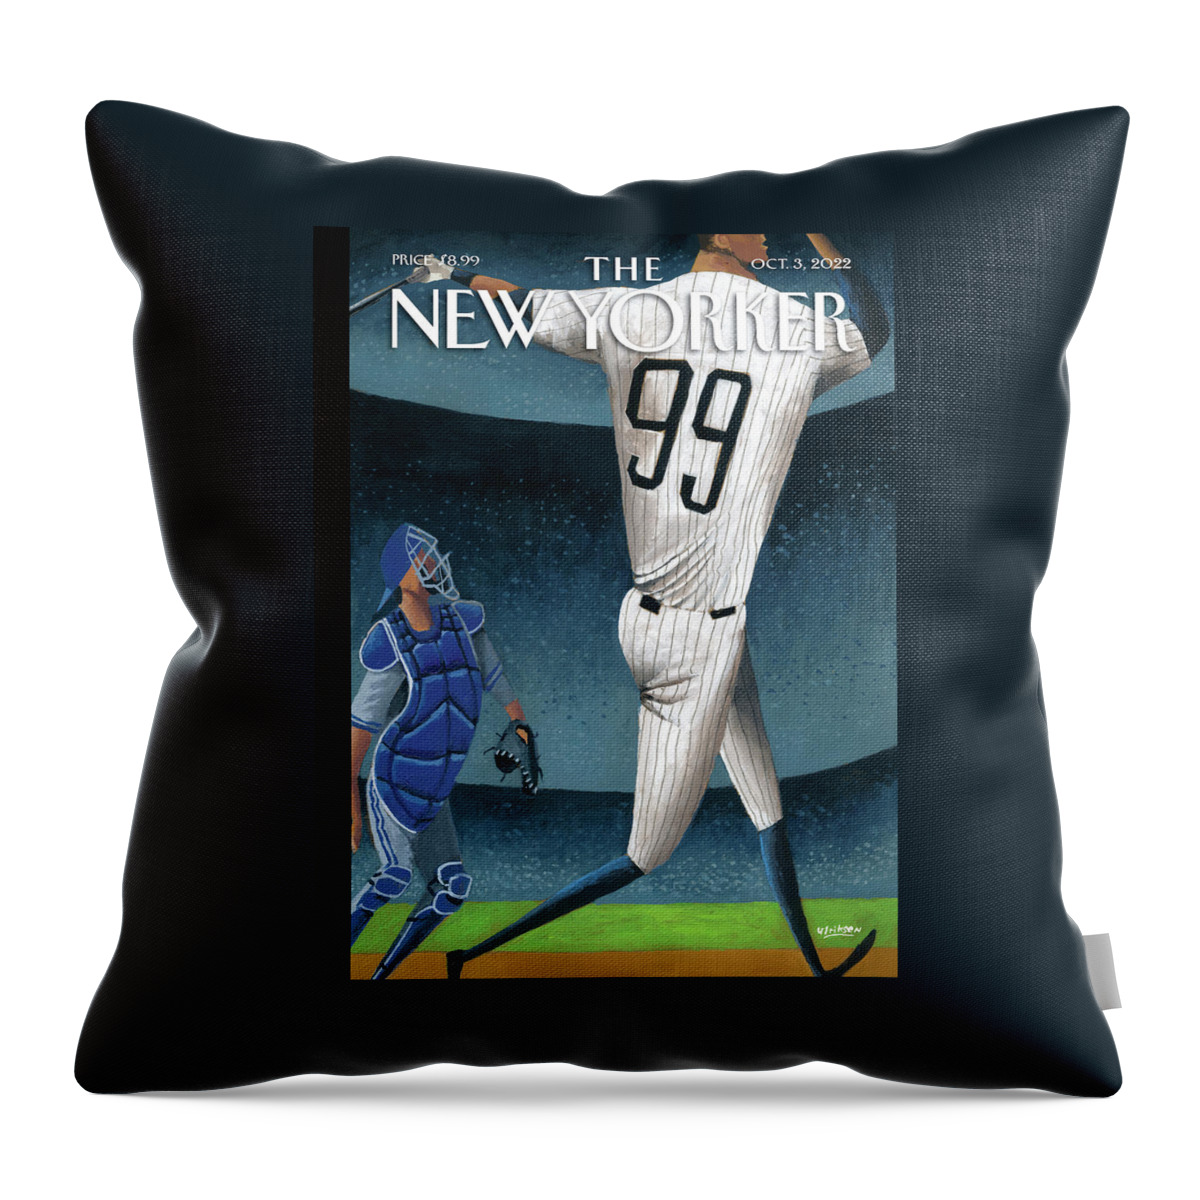 All Rise Throw Pillow